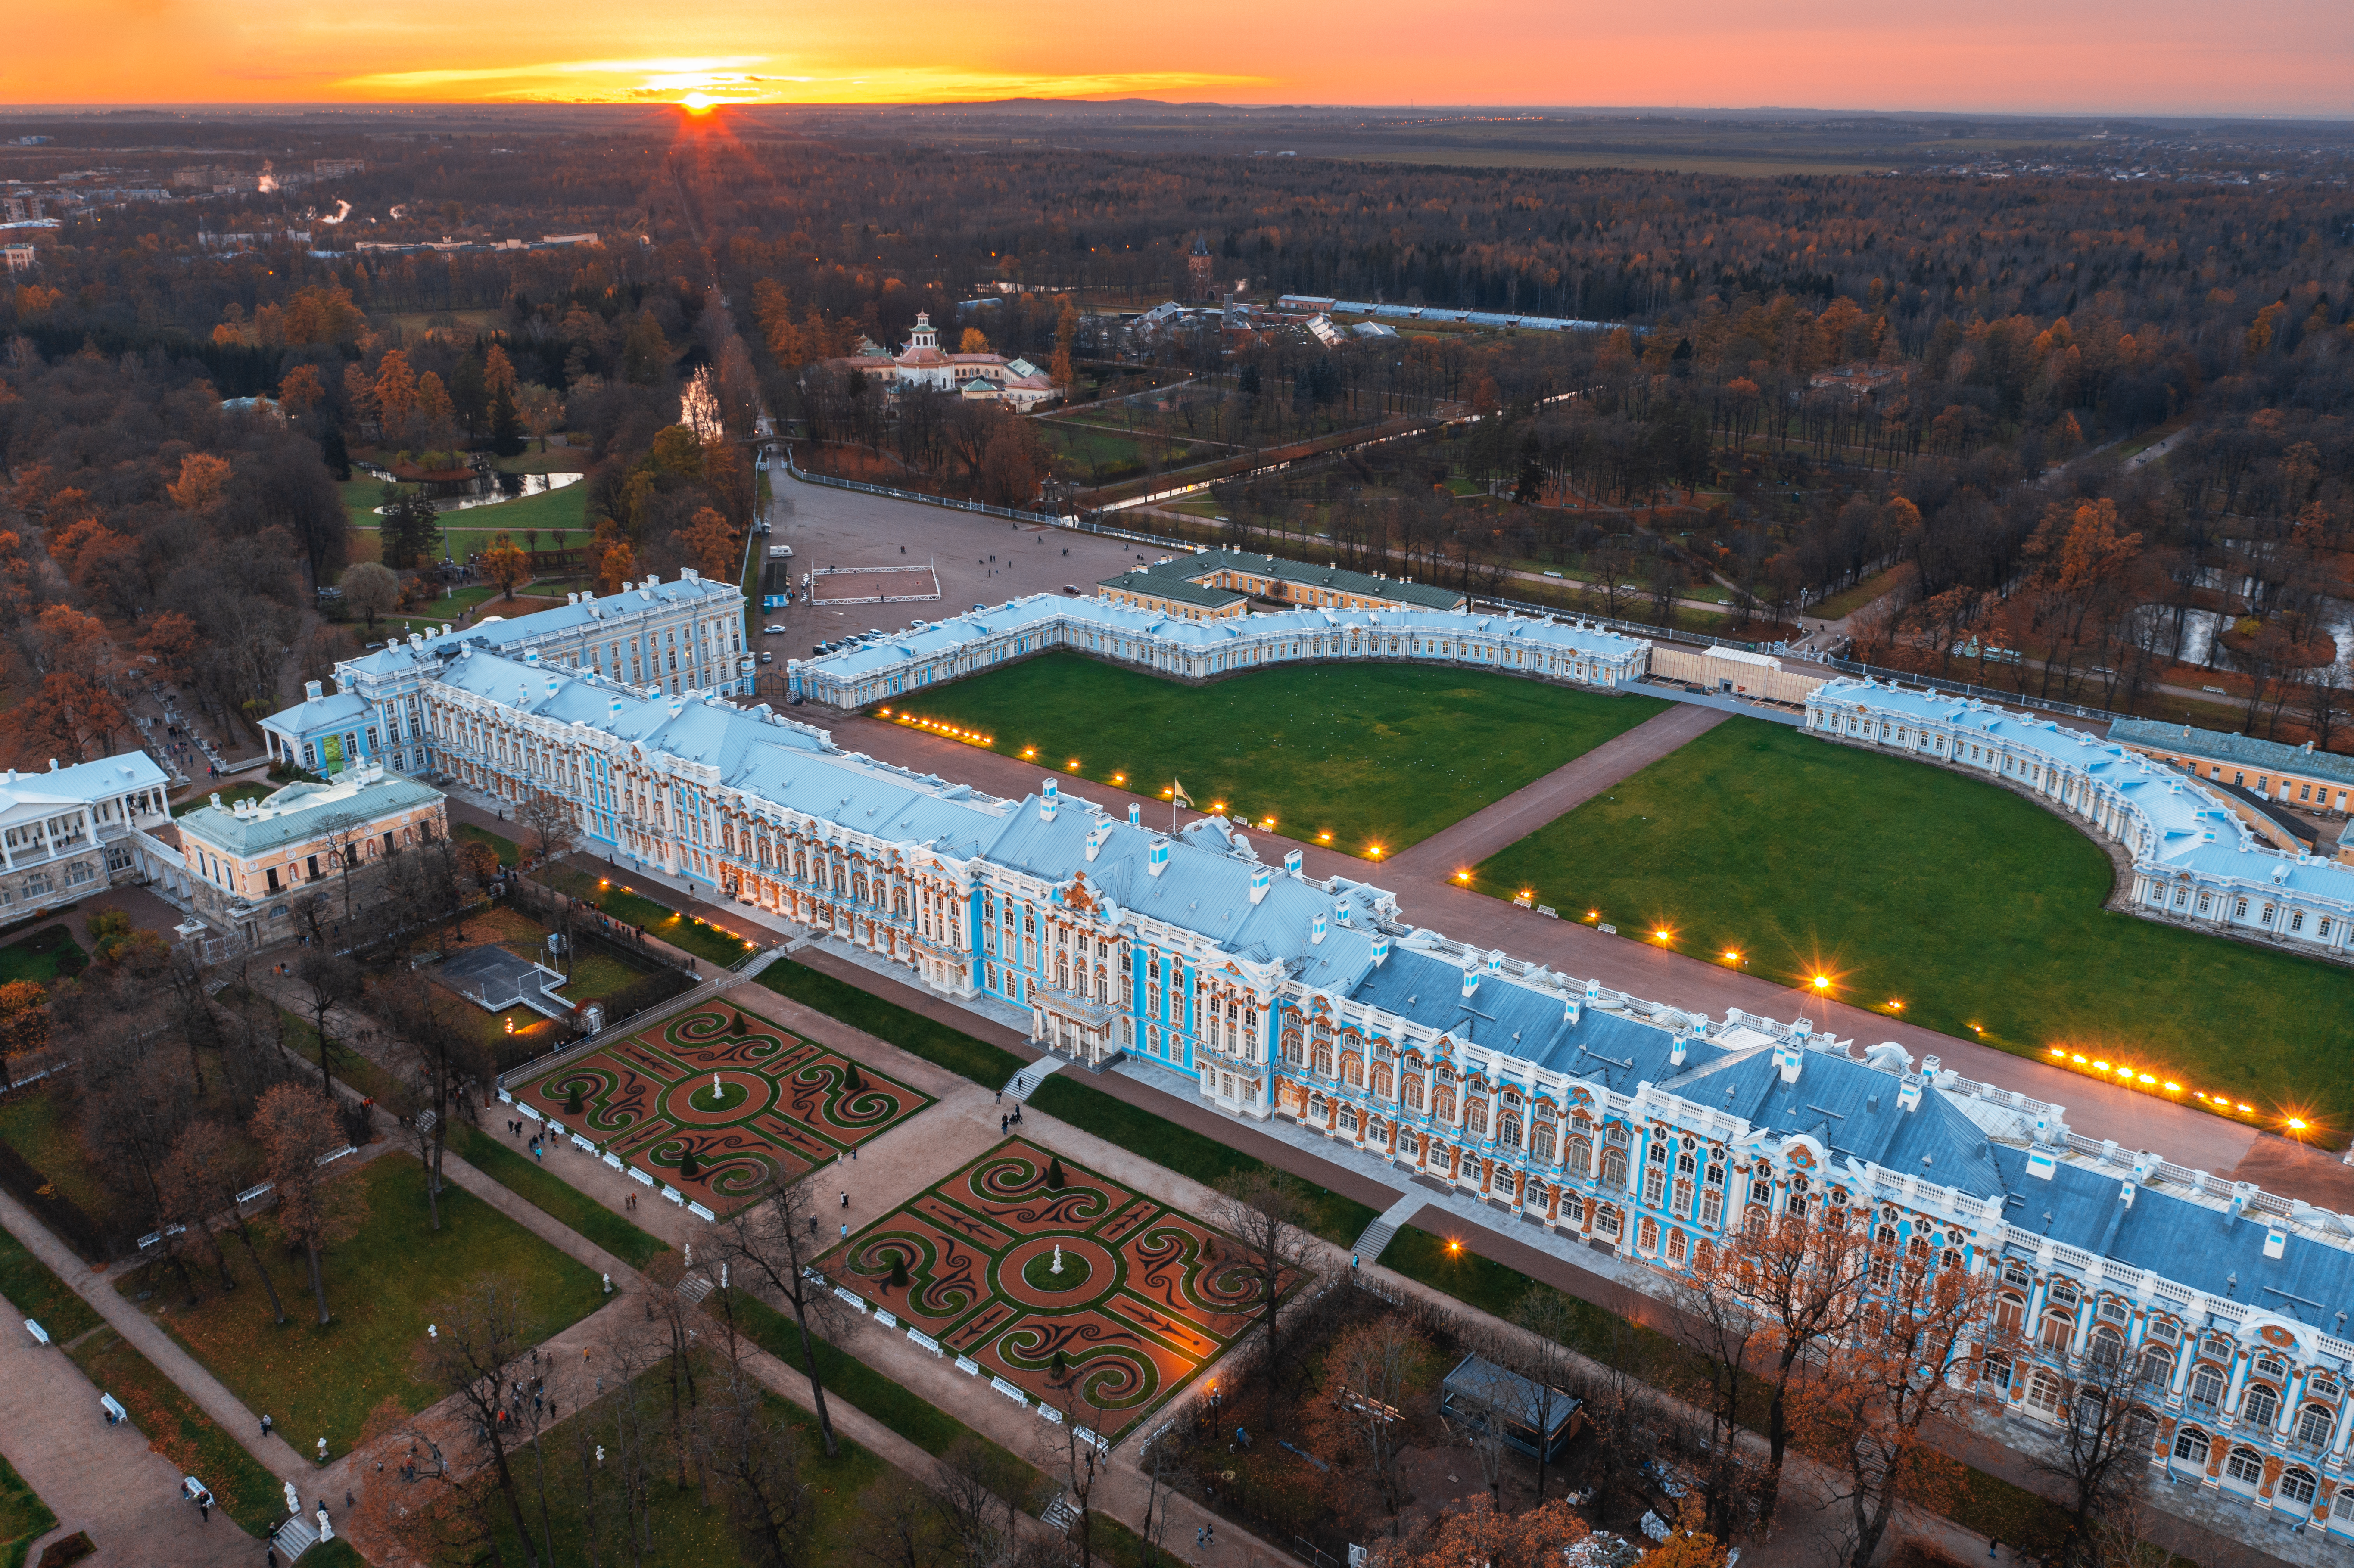 Tsarskoe Selo State Museum and Heritage Site